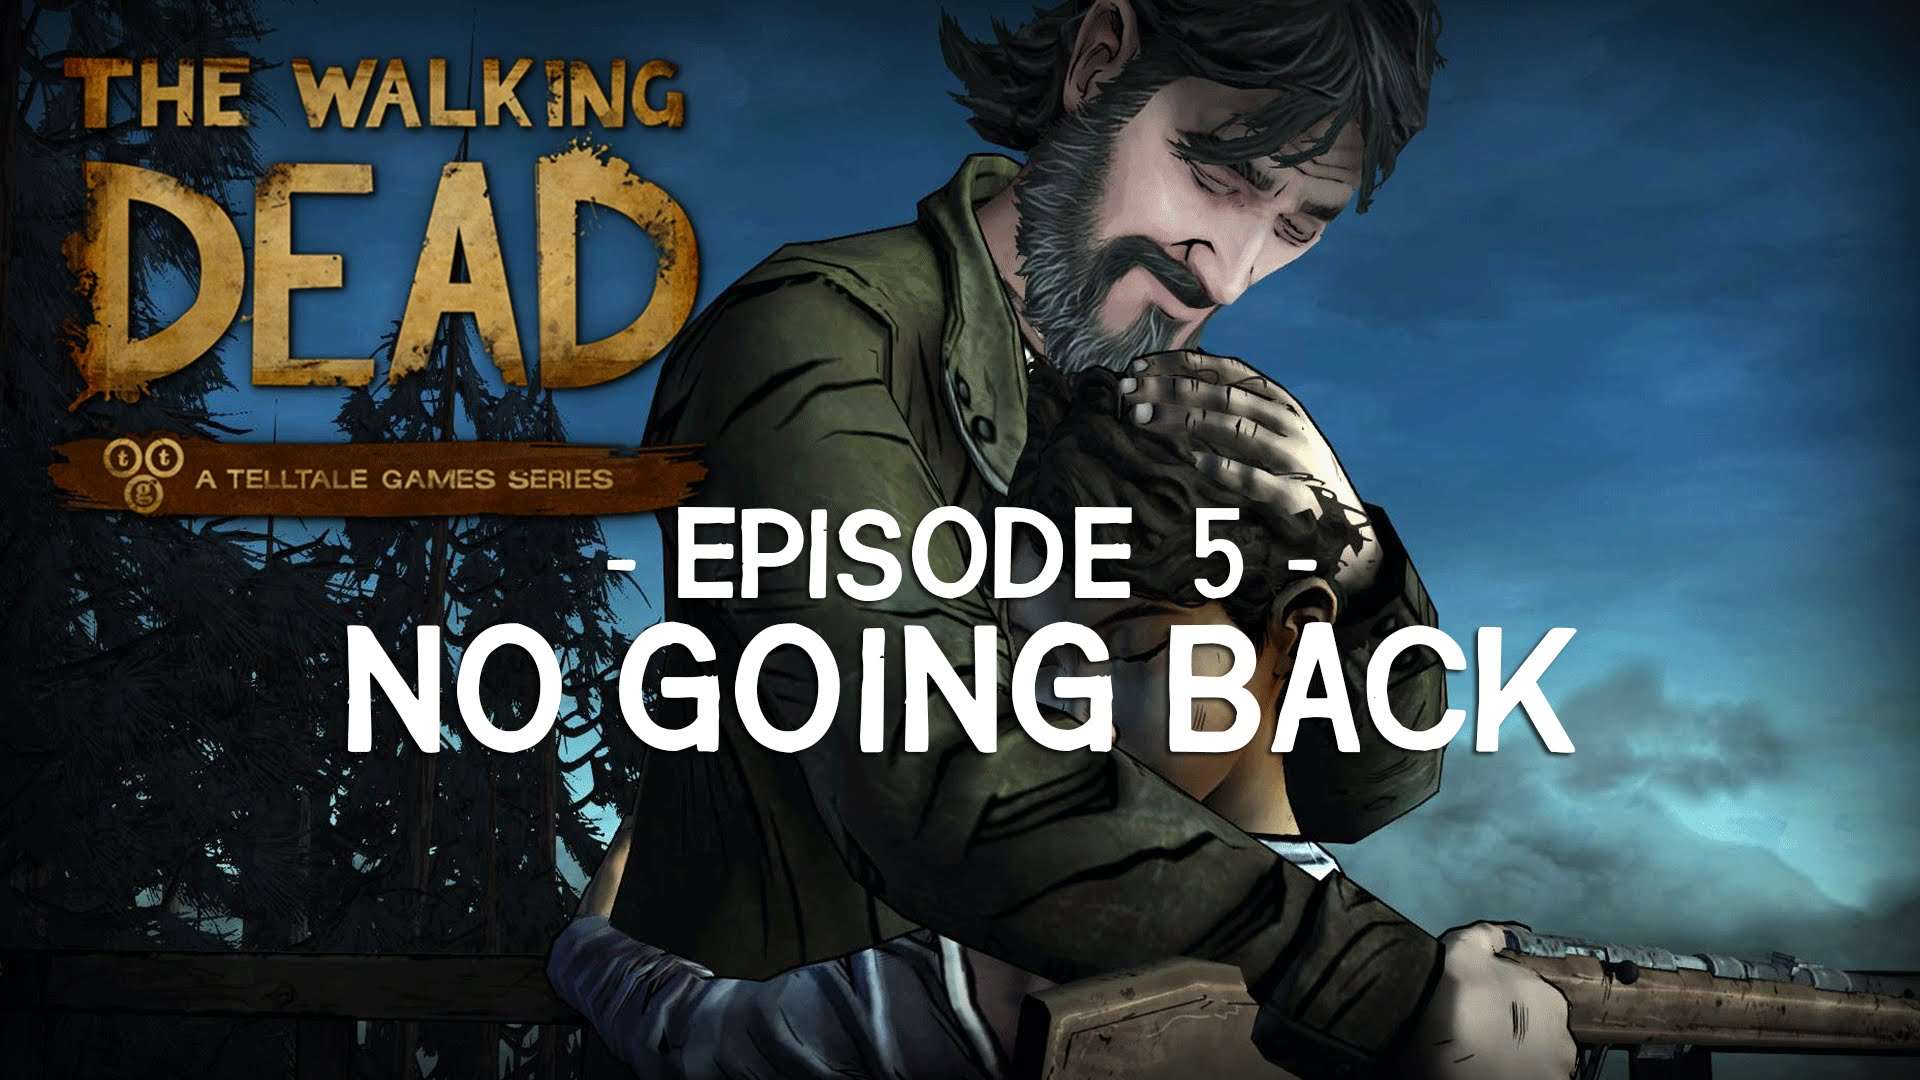 download the walking dead season 2 game for free